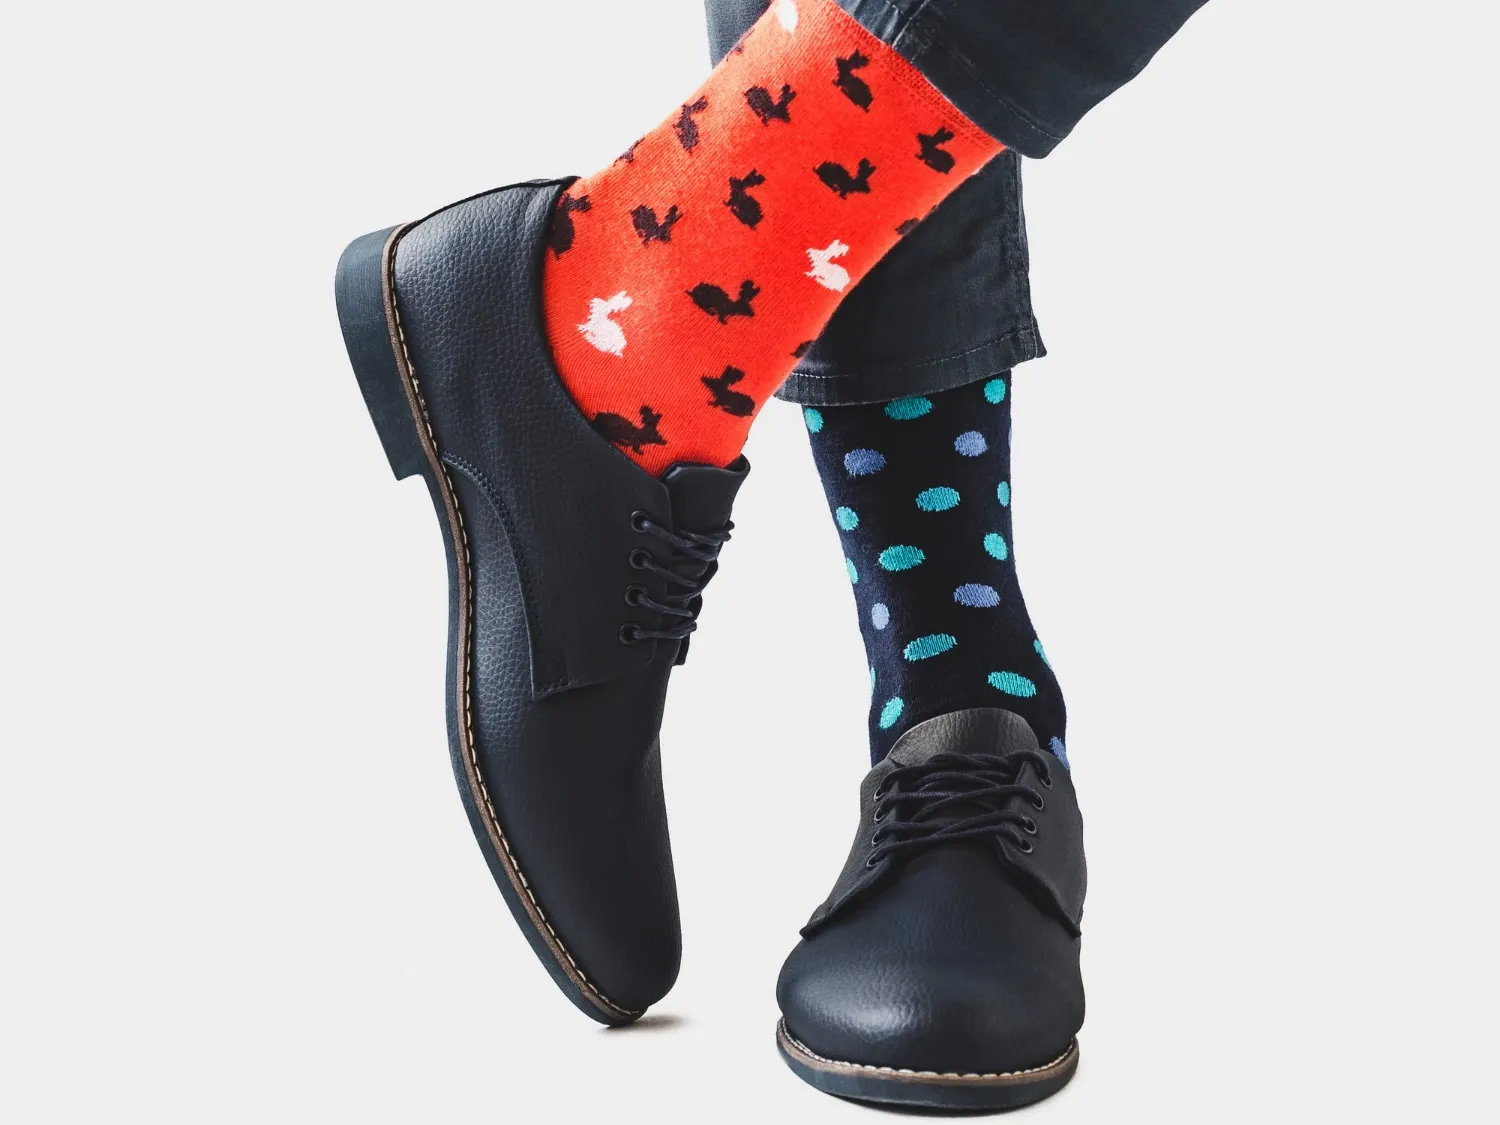 Mens legs, trendy shoes and bright socks.